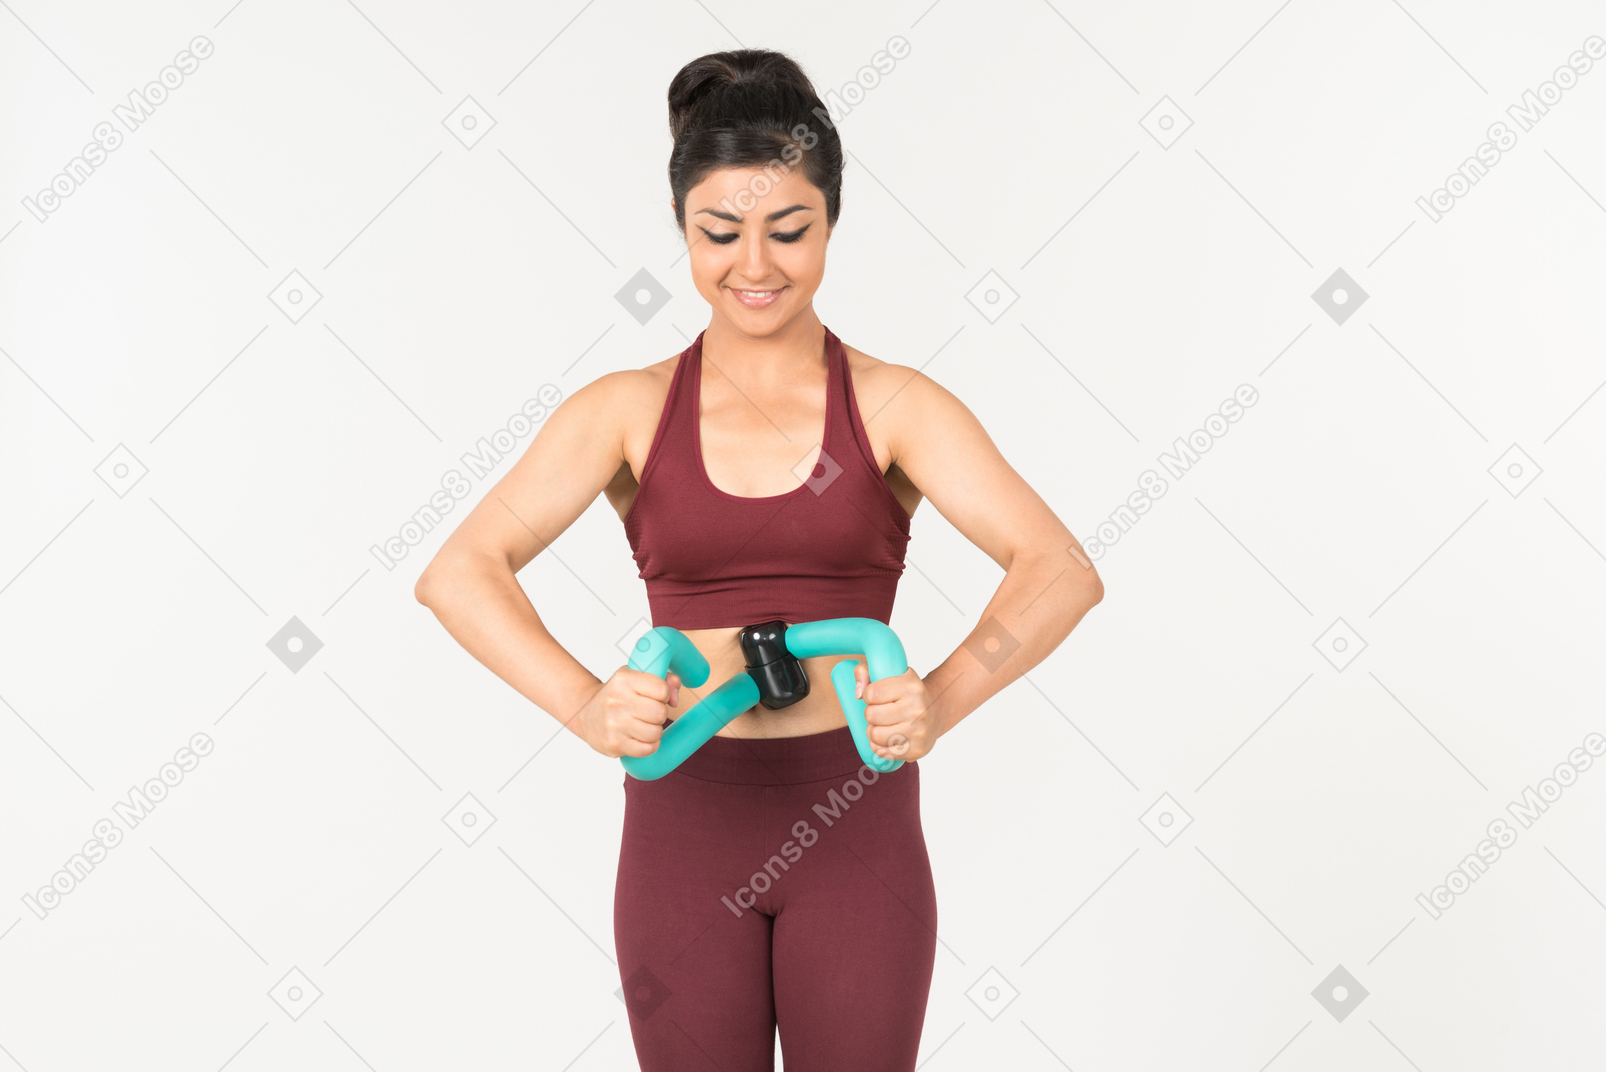 Young indian woman in sportswear holding hand expander